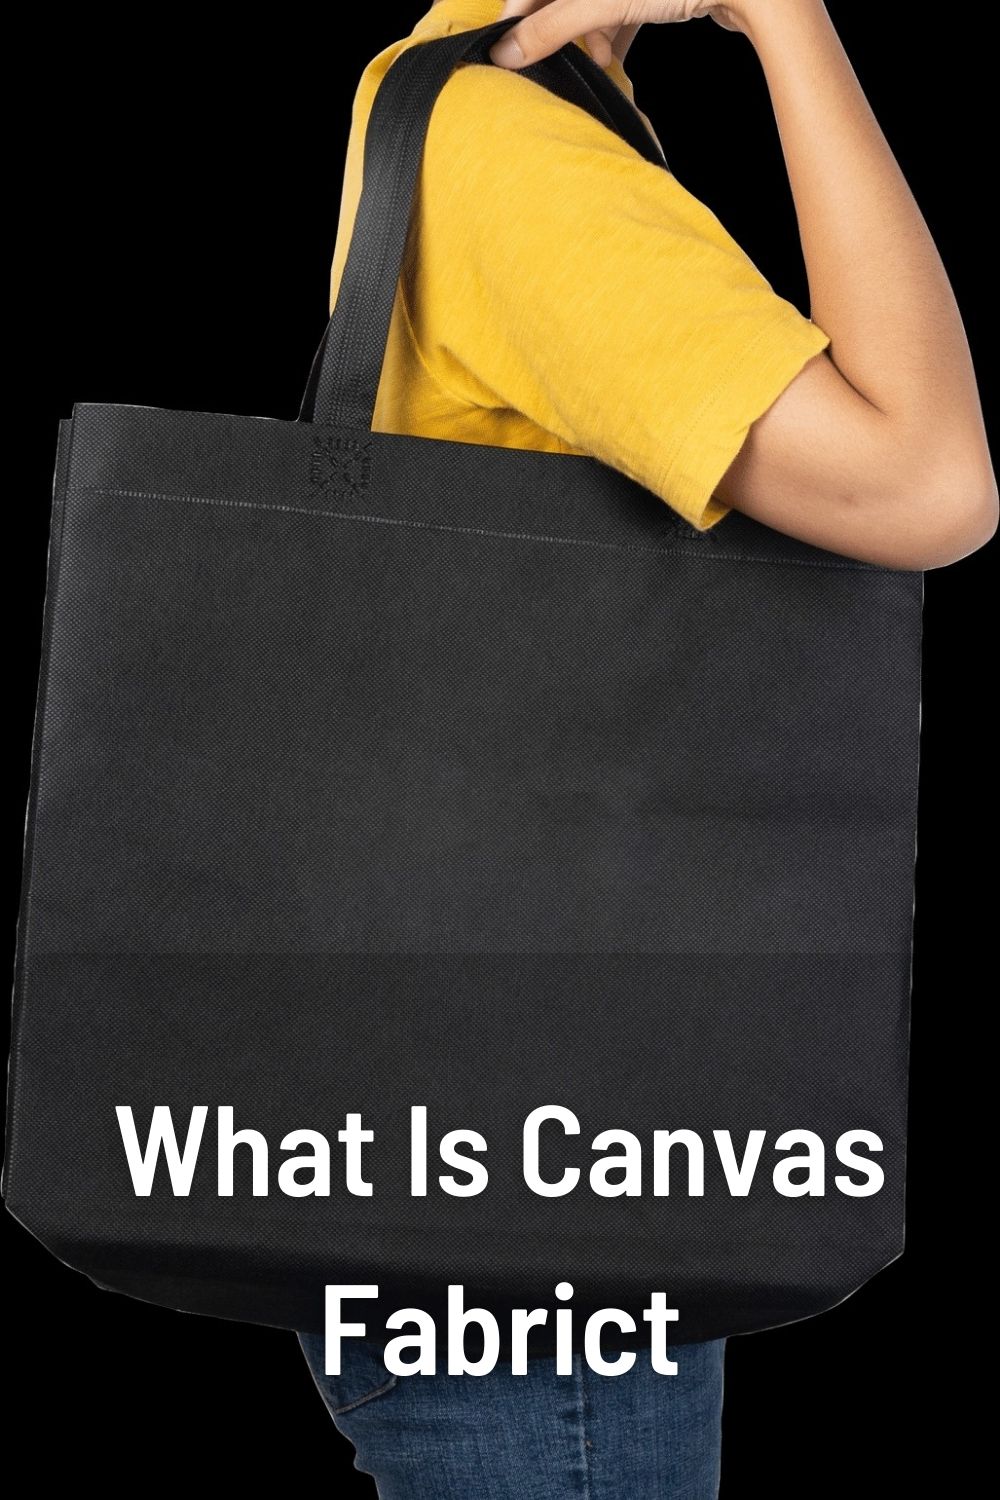 What Is Canvas Fabric